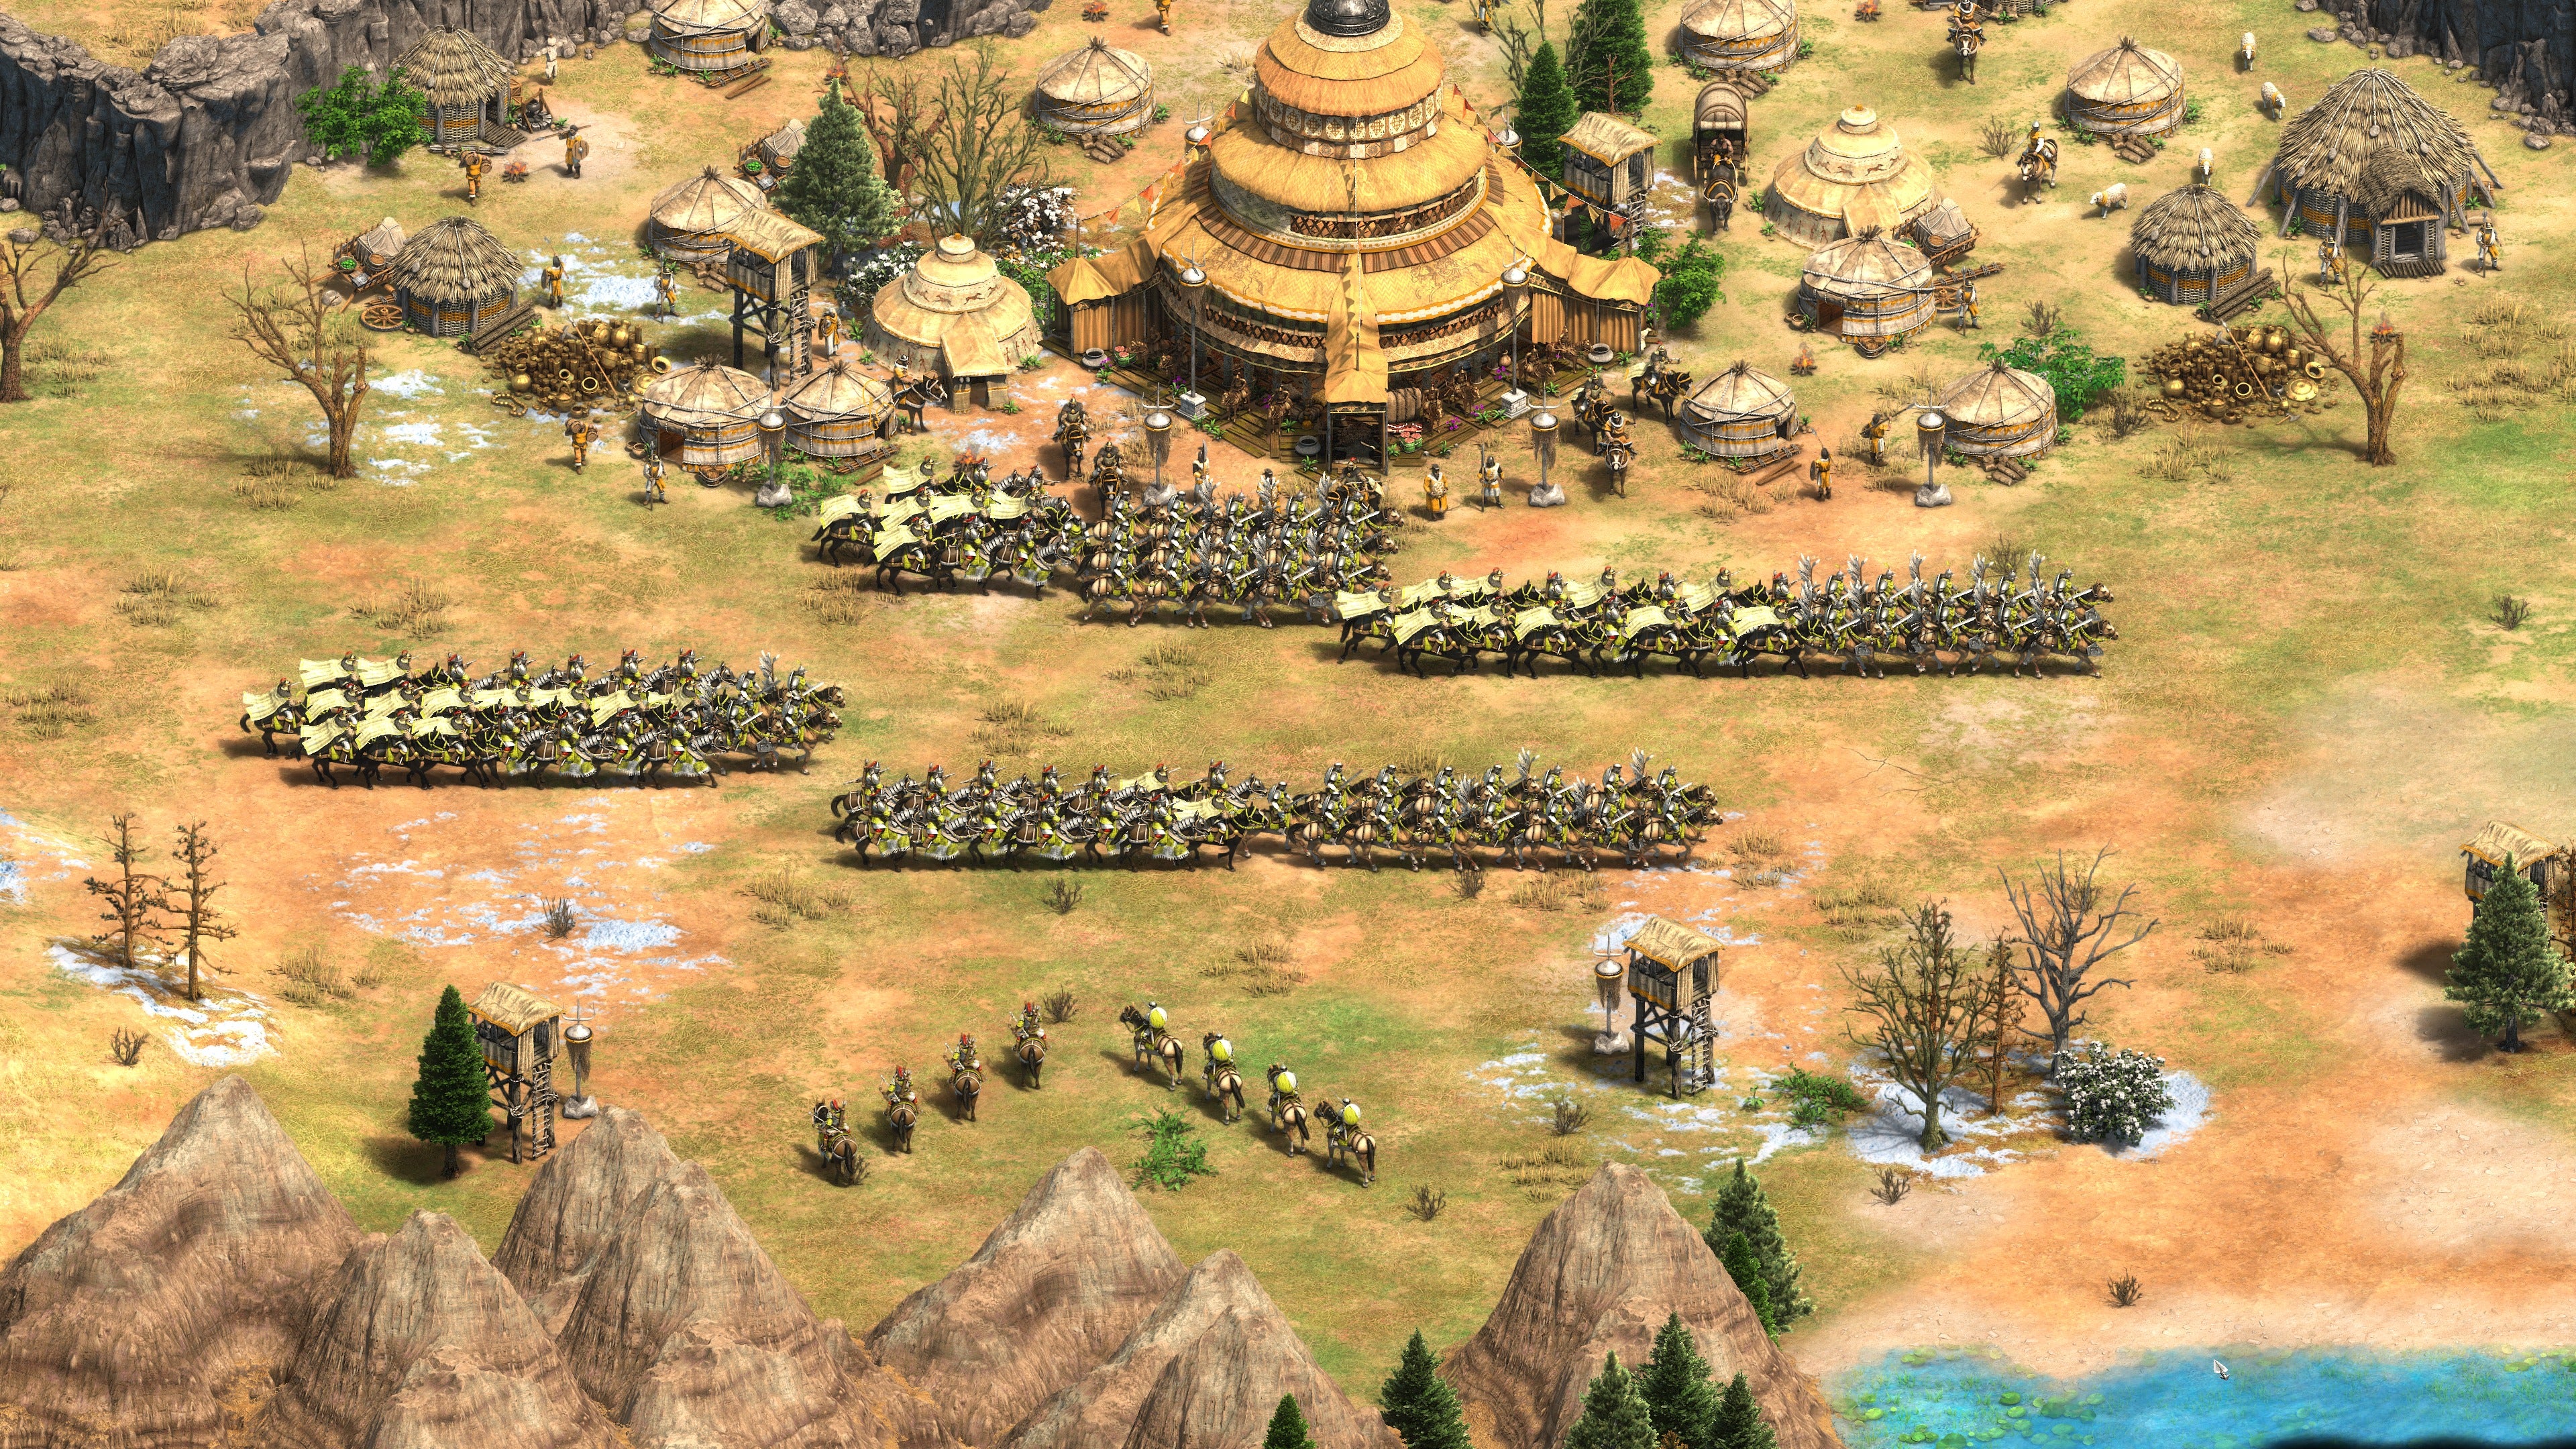 age of empires 2 starting build order